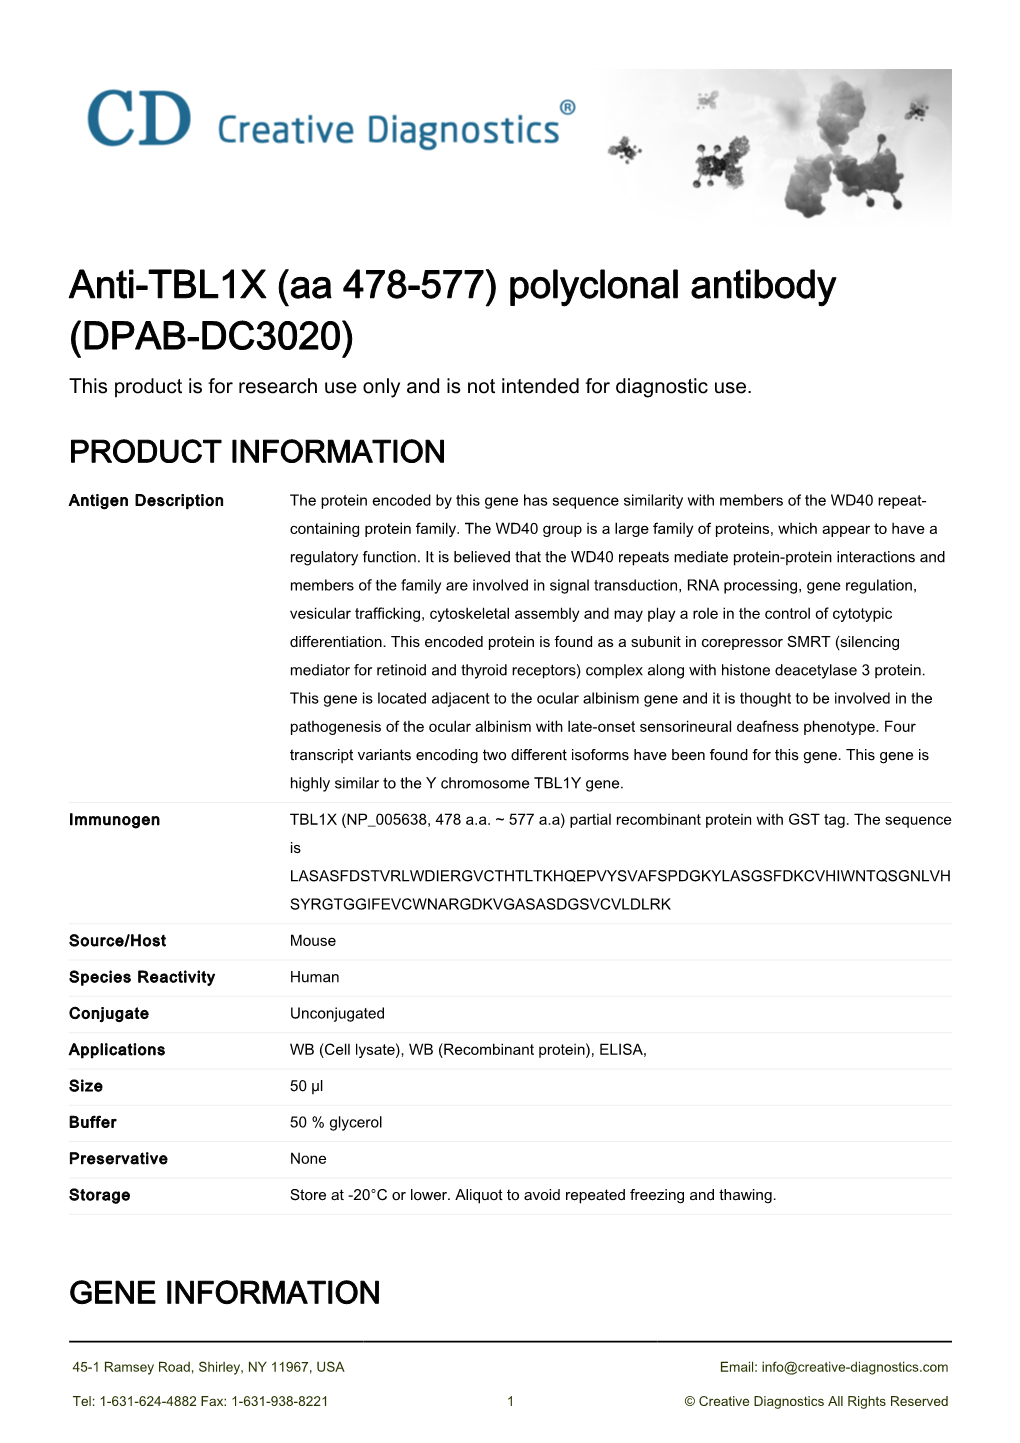 Anti-TBL1X (Aa 478-577) Polyclonal Antibody (DPAB-DC3020) This Product Is for Research Use Only and Is Not Intended for Diagnostic Use